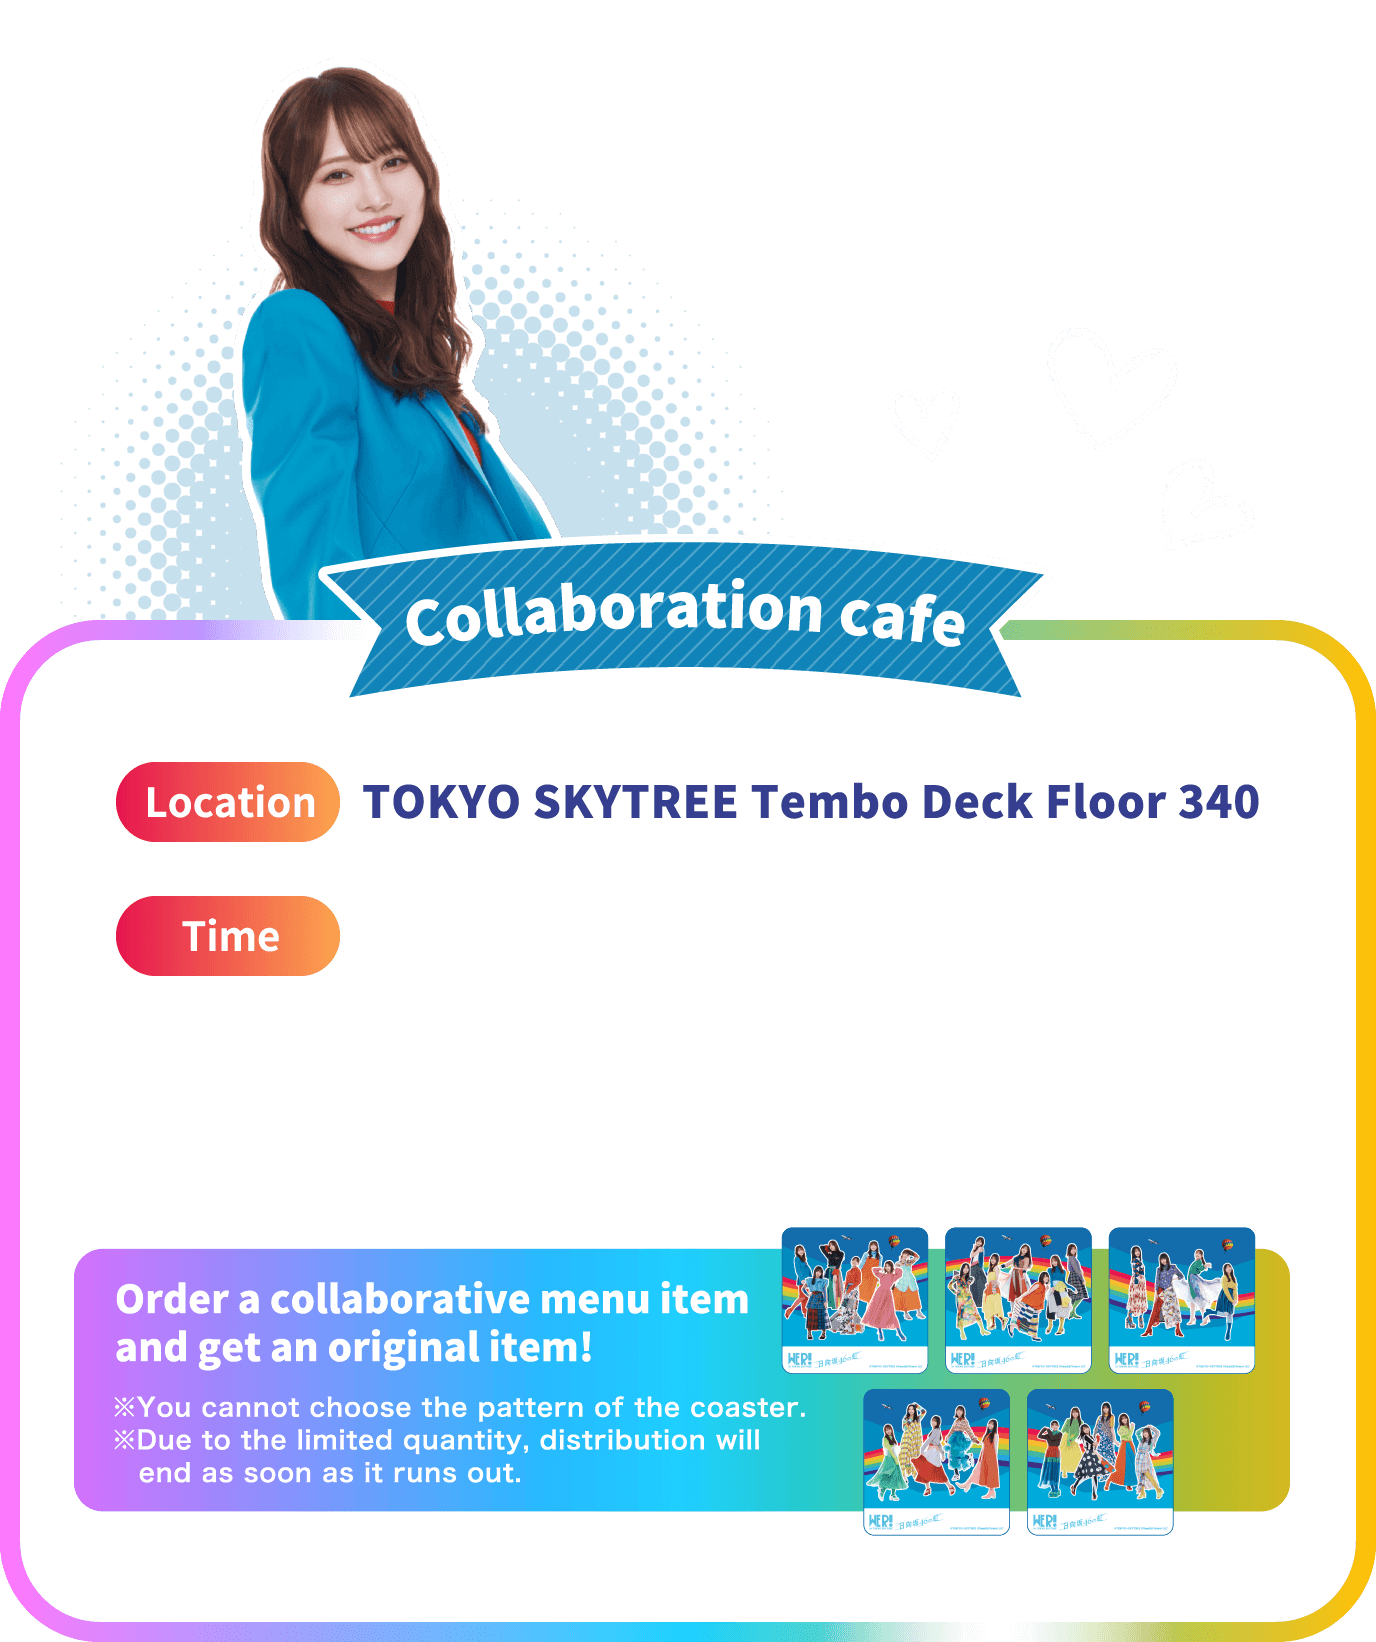 Collaboration cafe